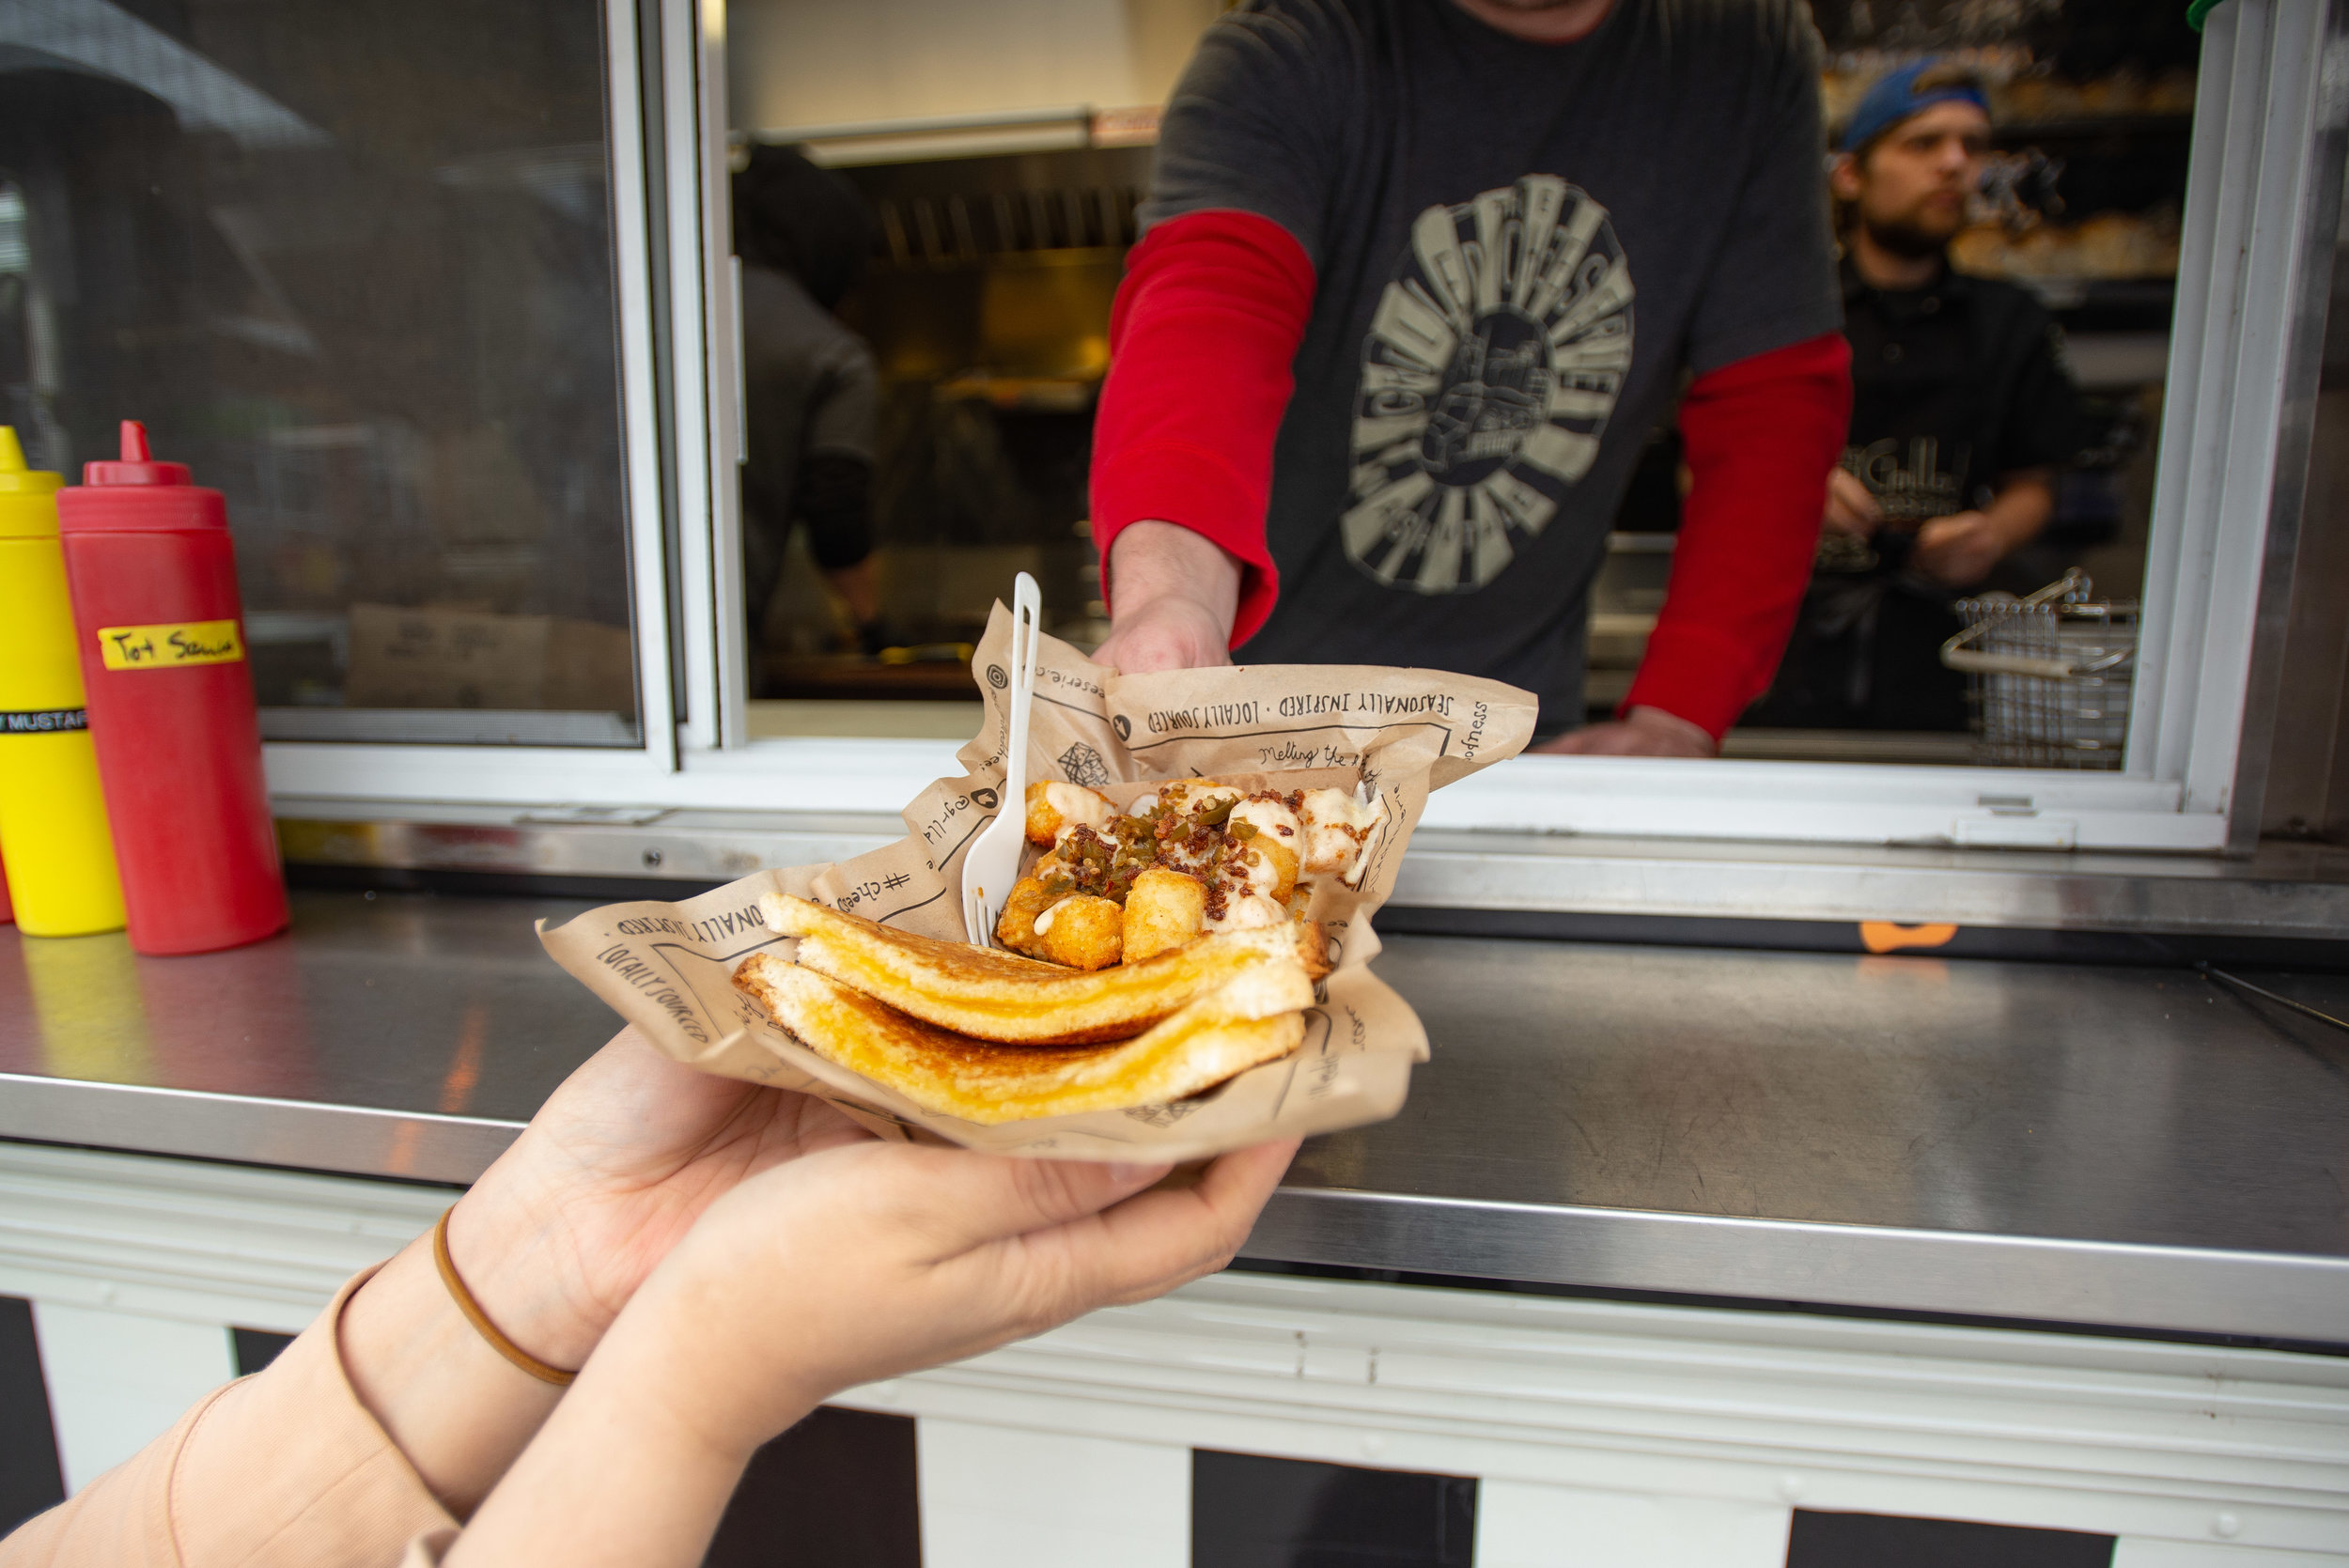 2018-04-09 Grilled Cheeserie - May food truck-4171.jpg